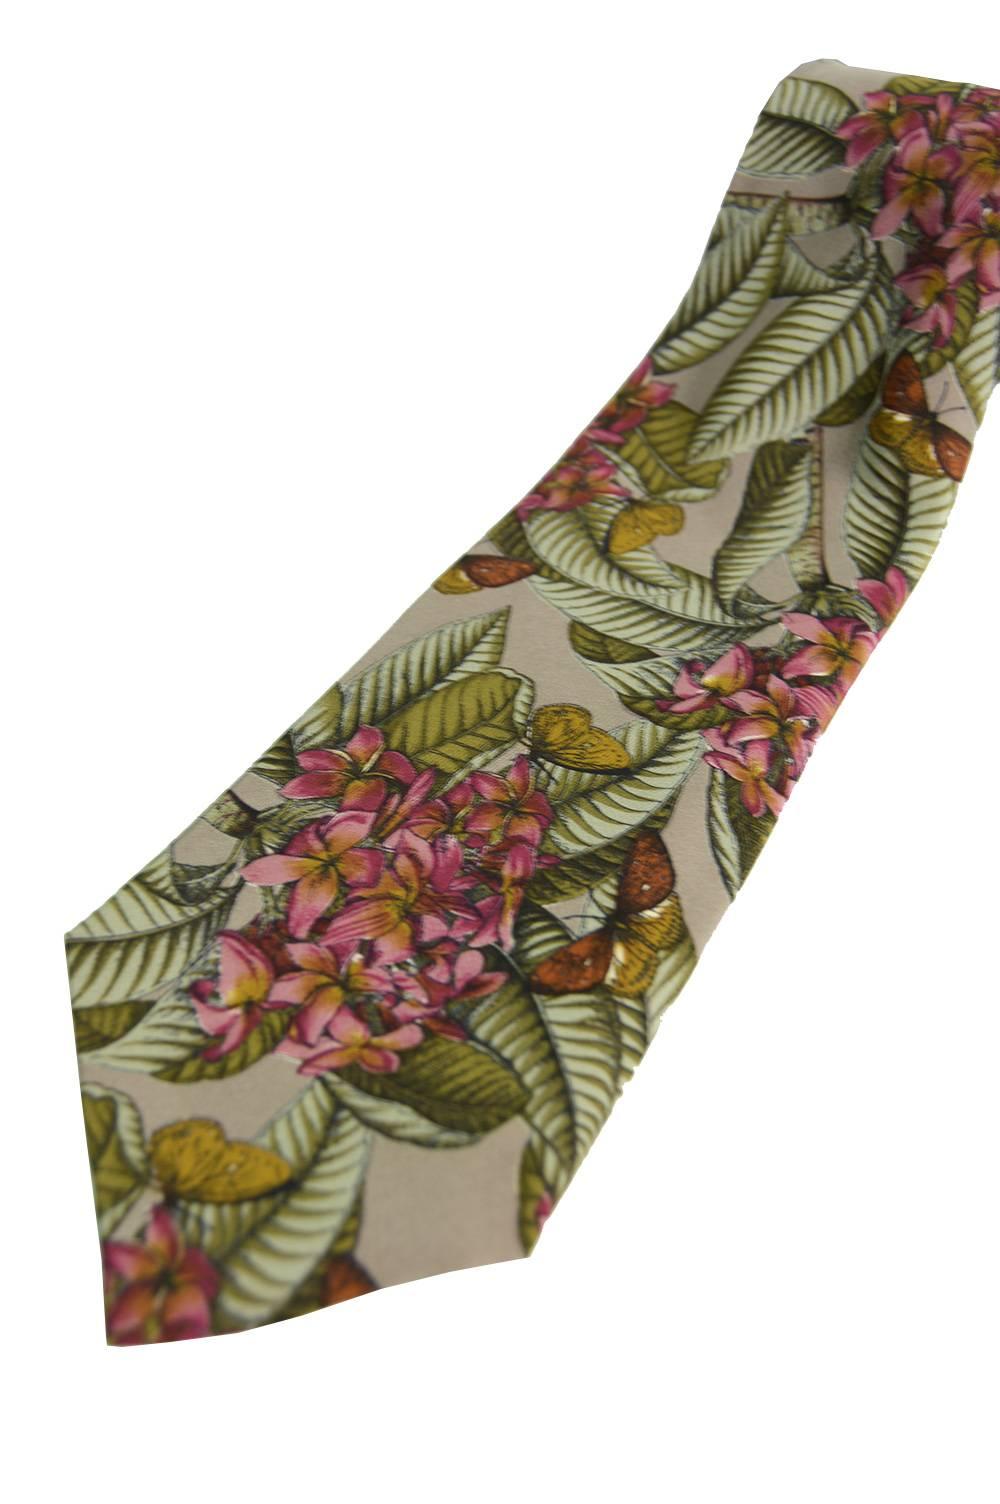 An elegant vintage mens necktie in a pure silk by French designer, Yves Saint Laurent. Looks so current, fitting with 70s trends whilst still being stylish and classic, it would make the perfect gift for him. With a floral and butterfly print